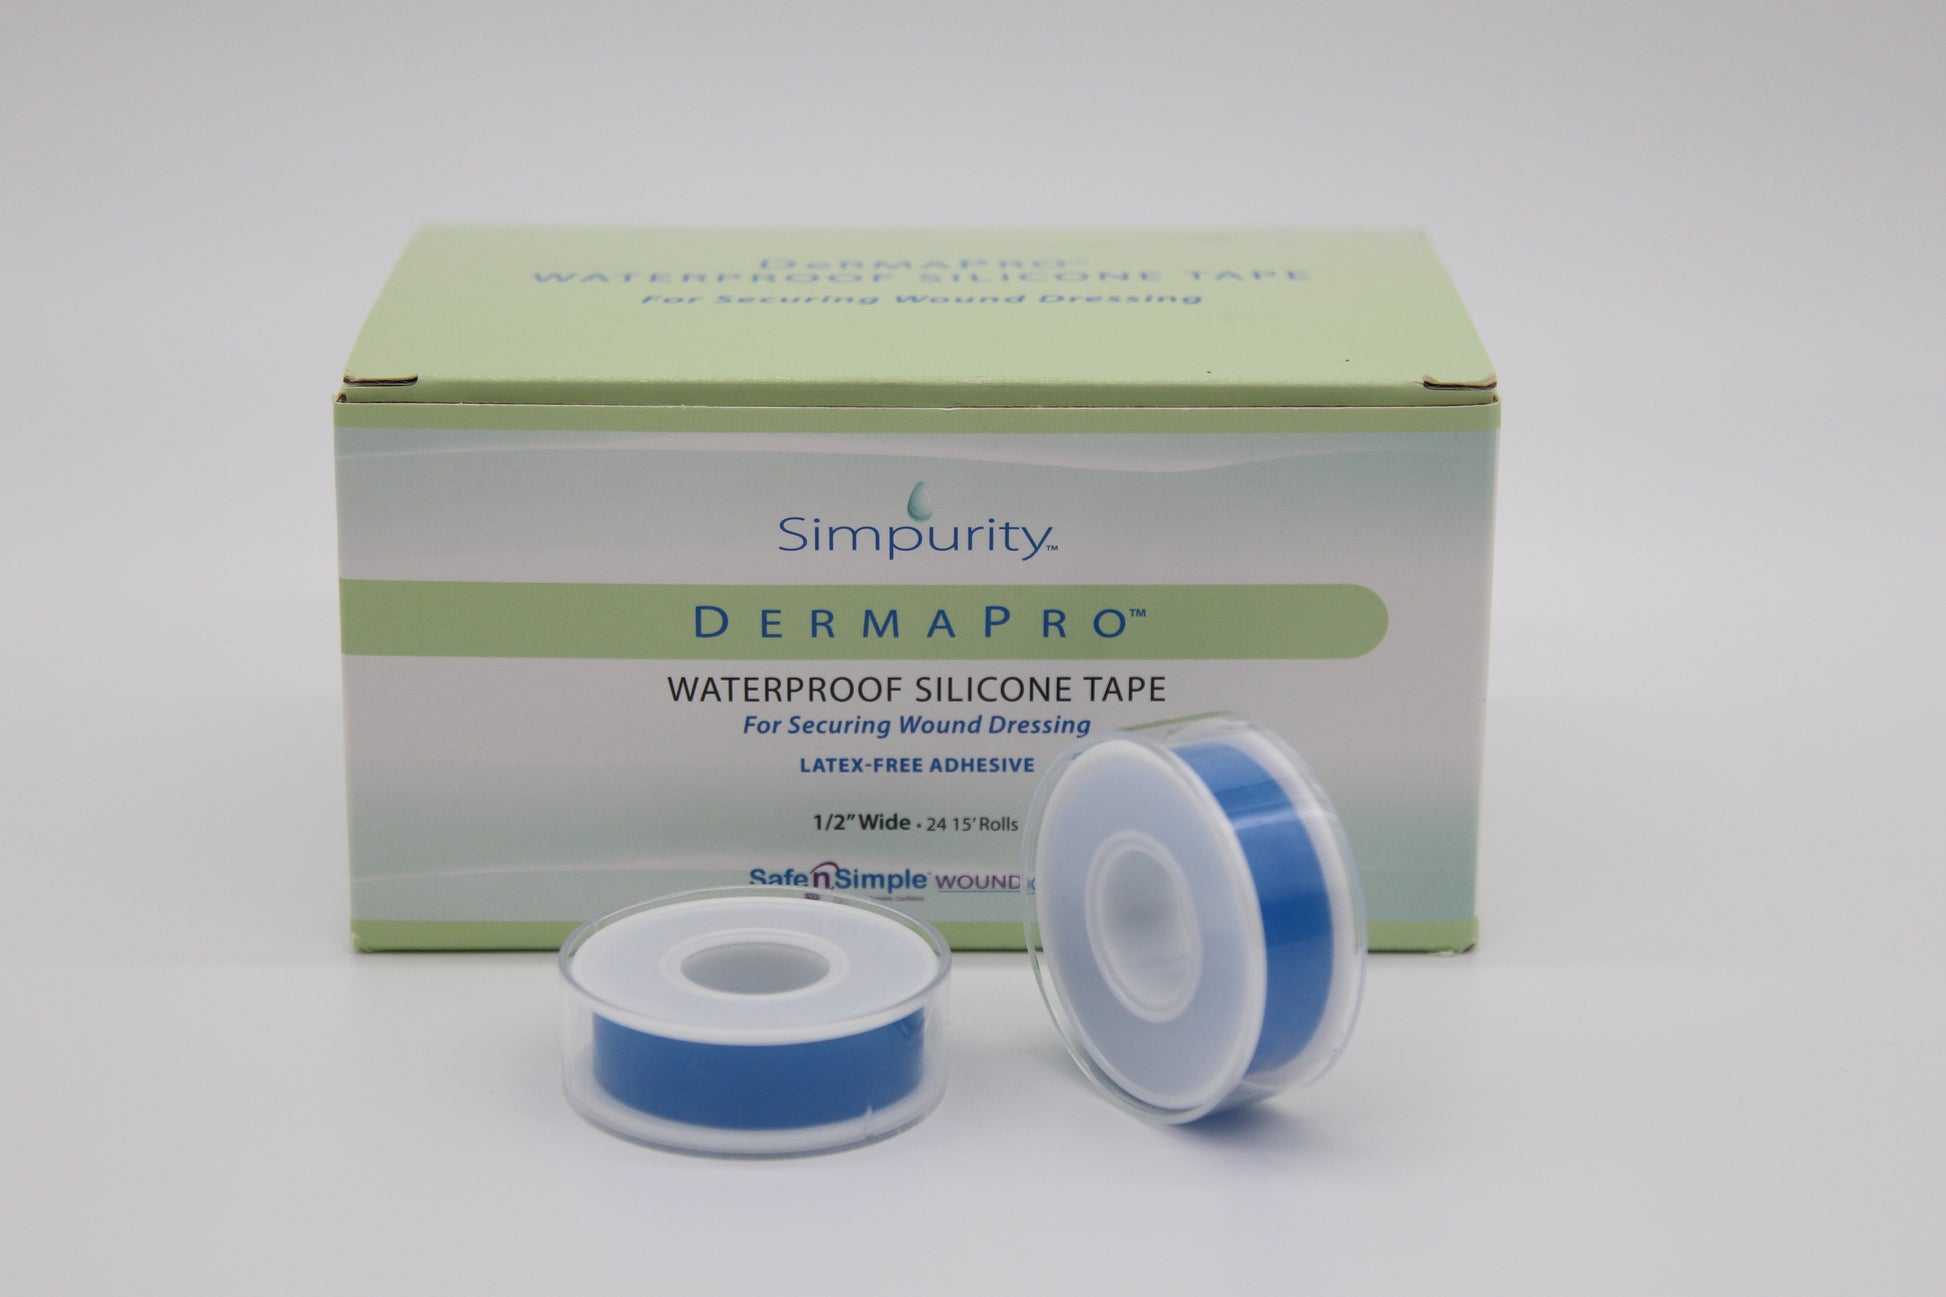 DermaPro Waterproof Silicone Tape | medical products | advanced wound care | Safe n Simple | SNS Medical